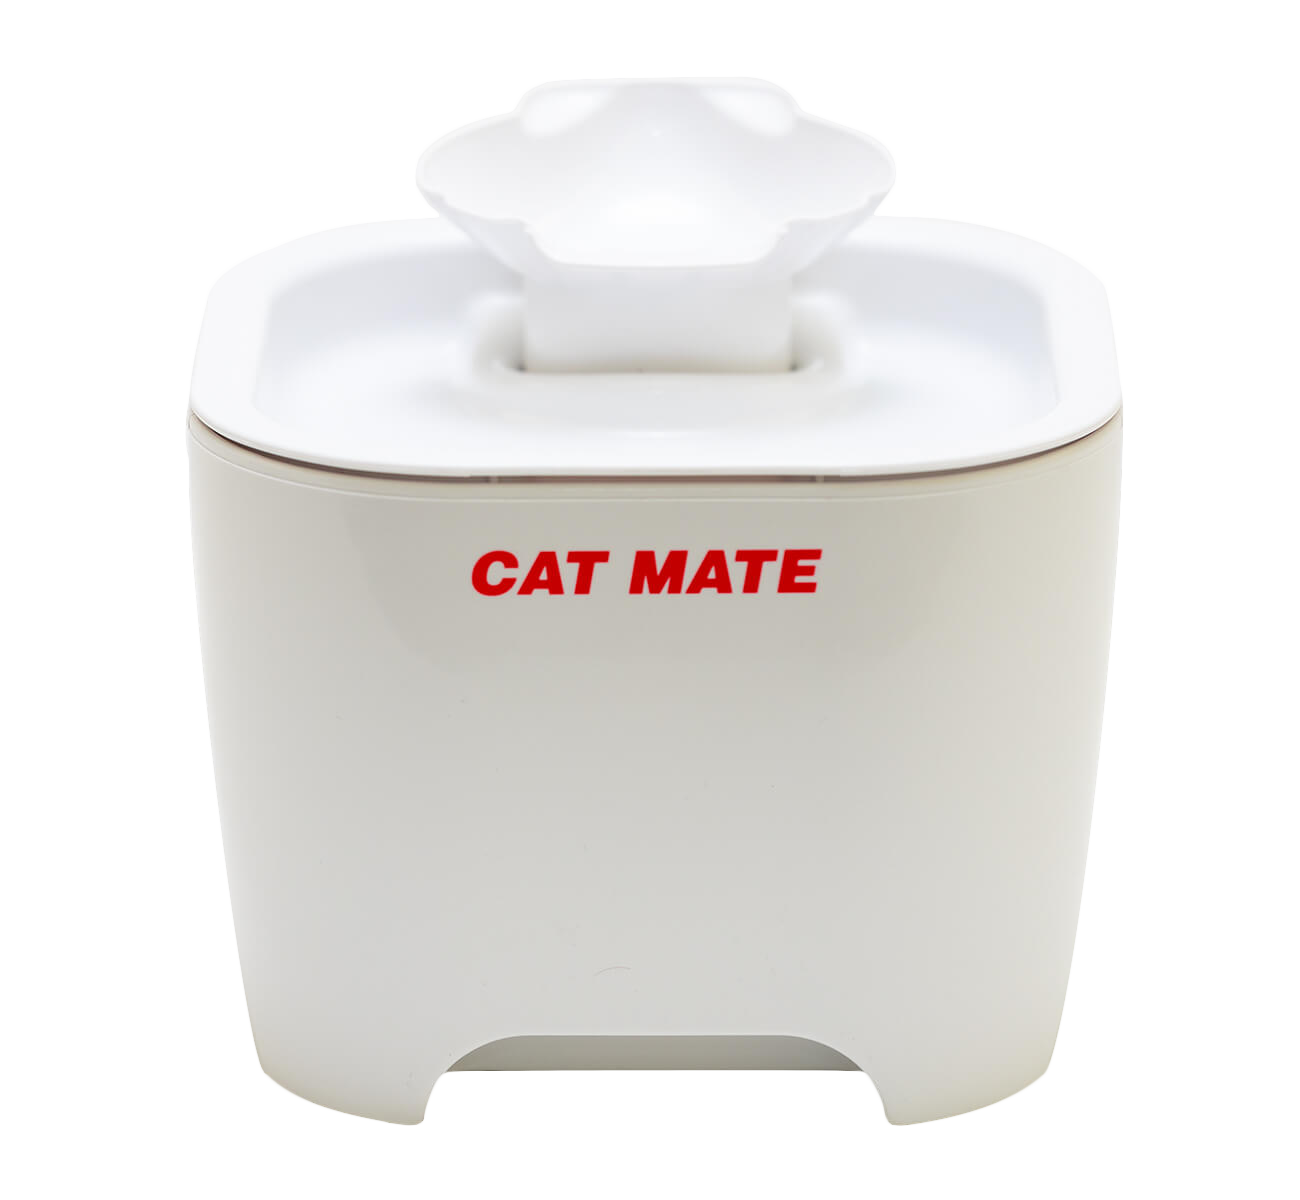  Cat Mate 3-Level, 70 fl. oz. Pet Fountain - BPA and BHT Free  with 3-Stage Filter and Low Voltage Pump : Pet Self Waterers : Pet Supplies